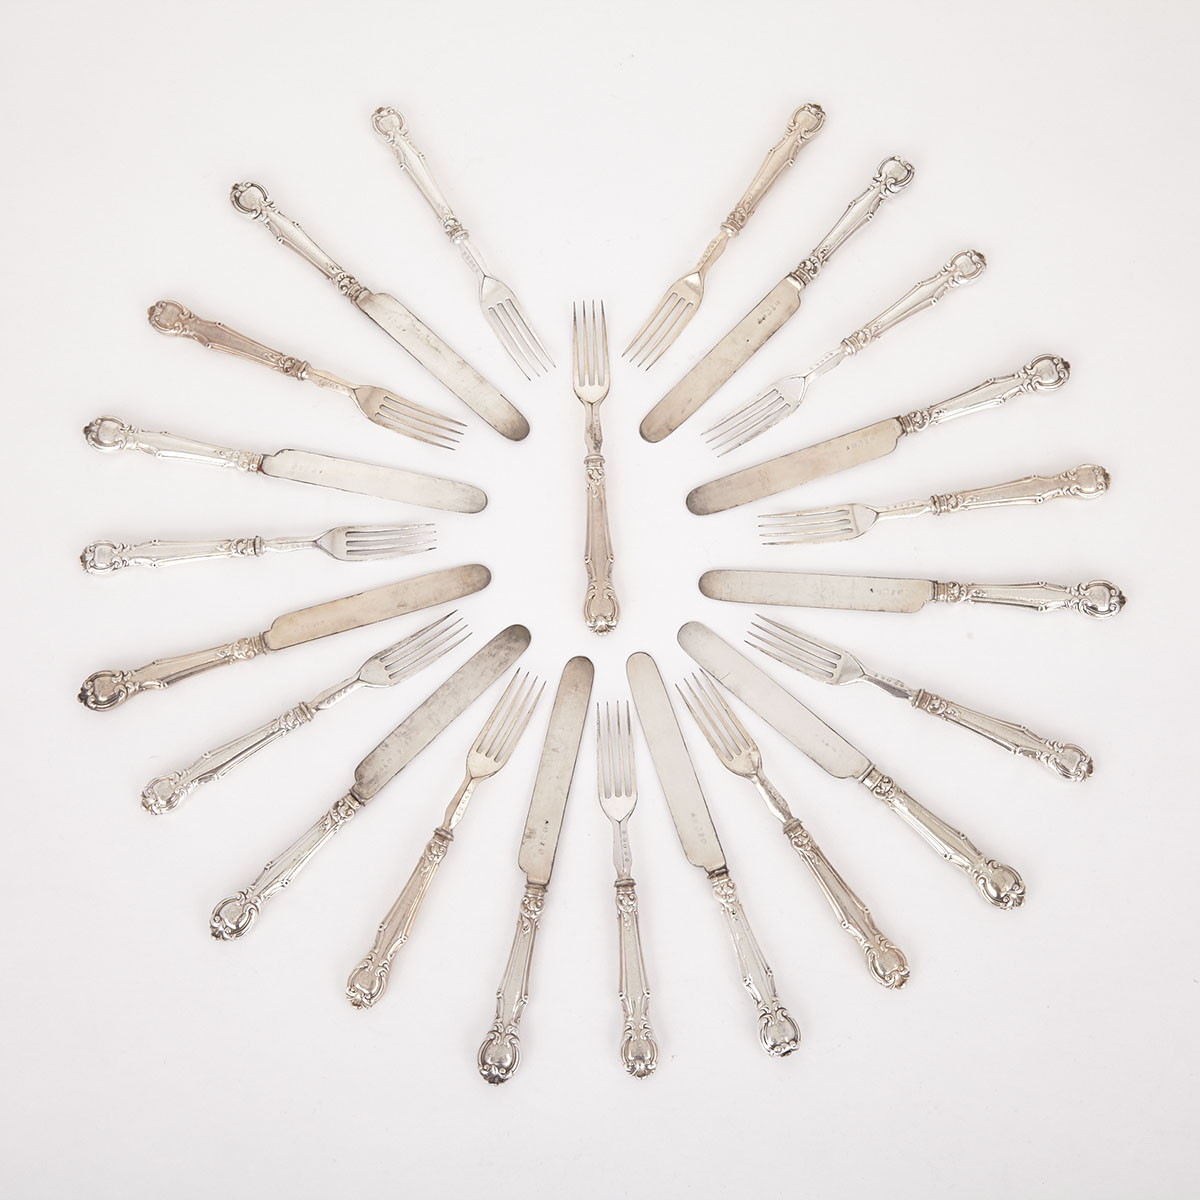 Ten Victorian Silver Handled ‘Victoria Pattern’ Fruit Knives and Twelve Forks, Aaron Hadfield, Sheffield, mid-19th century